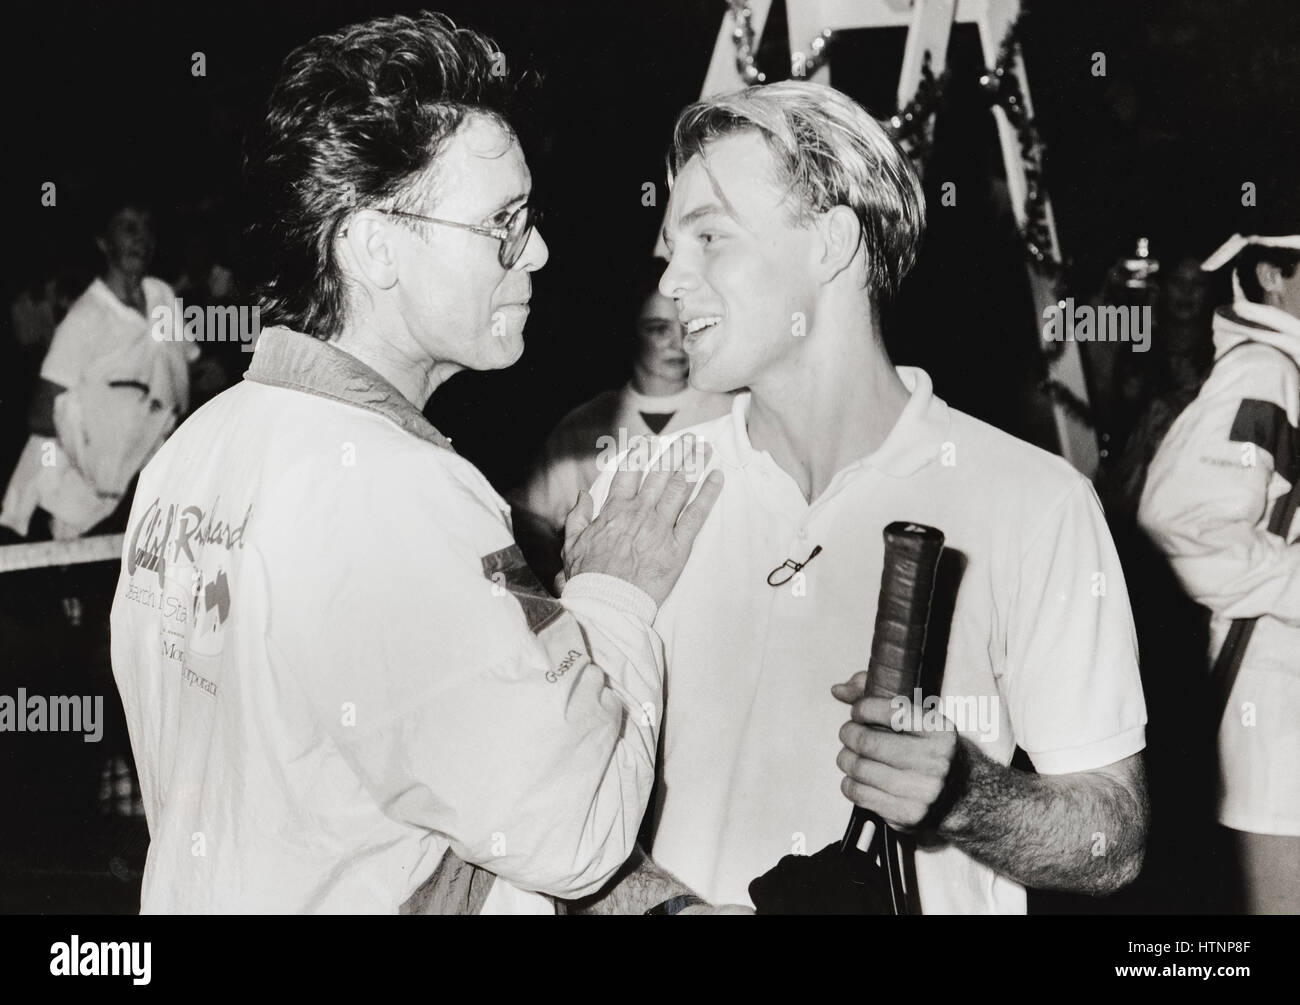 Cliff Richard at the Brighton Centre in the late 1980s - at his recently launched tennis charity called Search for a Star. Pictured here with Jason Donovan. Stock Photo